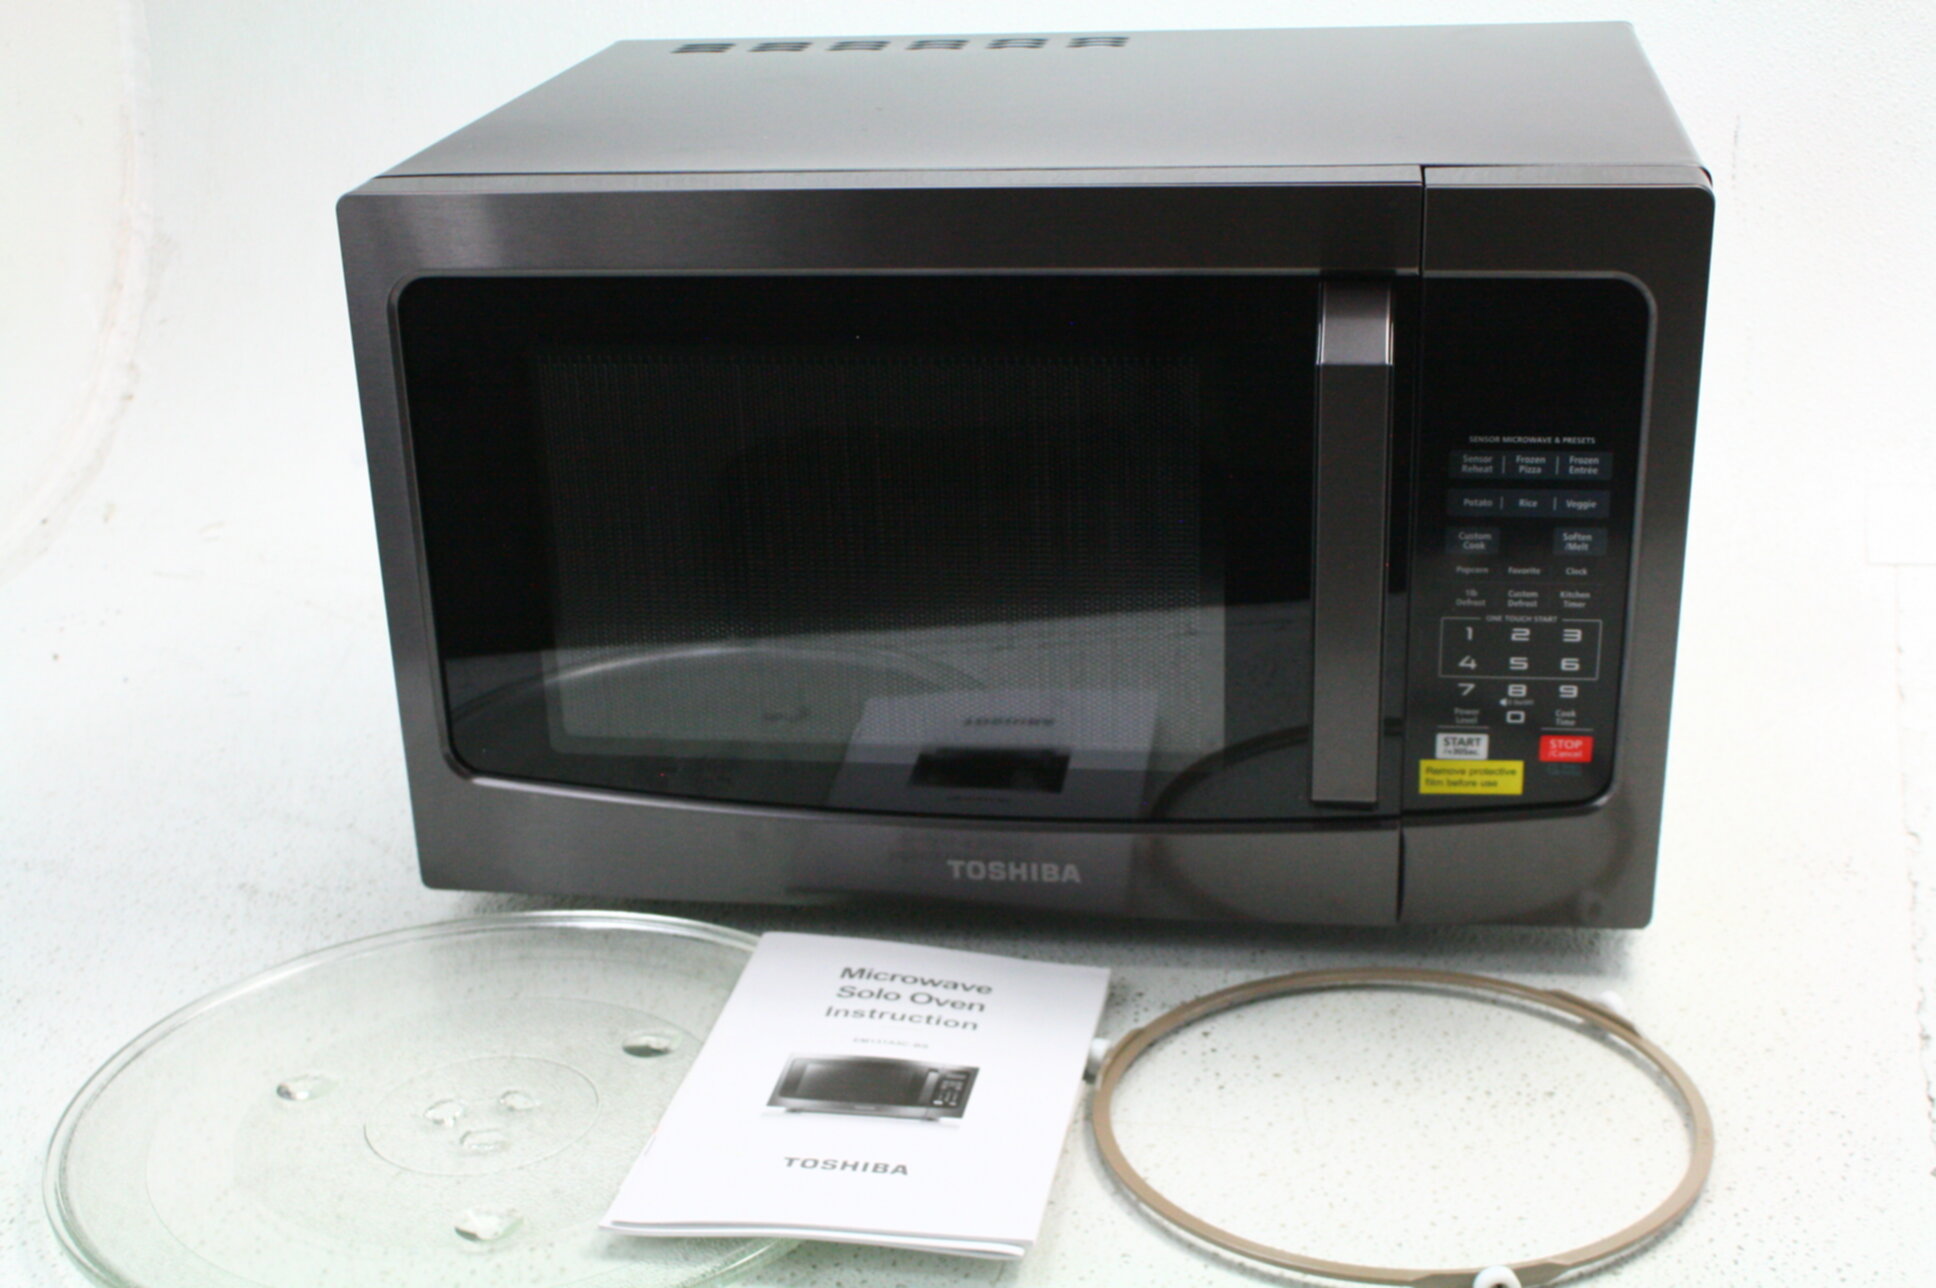 Toshiba EM131A5C-BS Microwave Oven Review: A Practical Choice